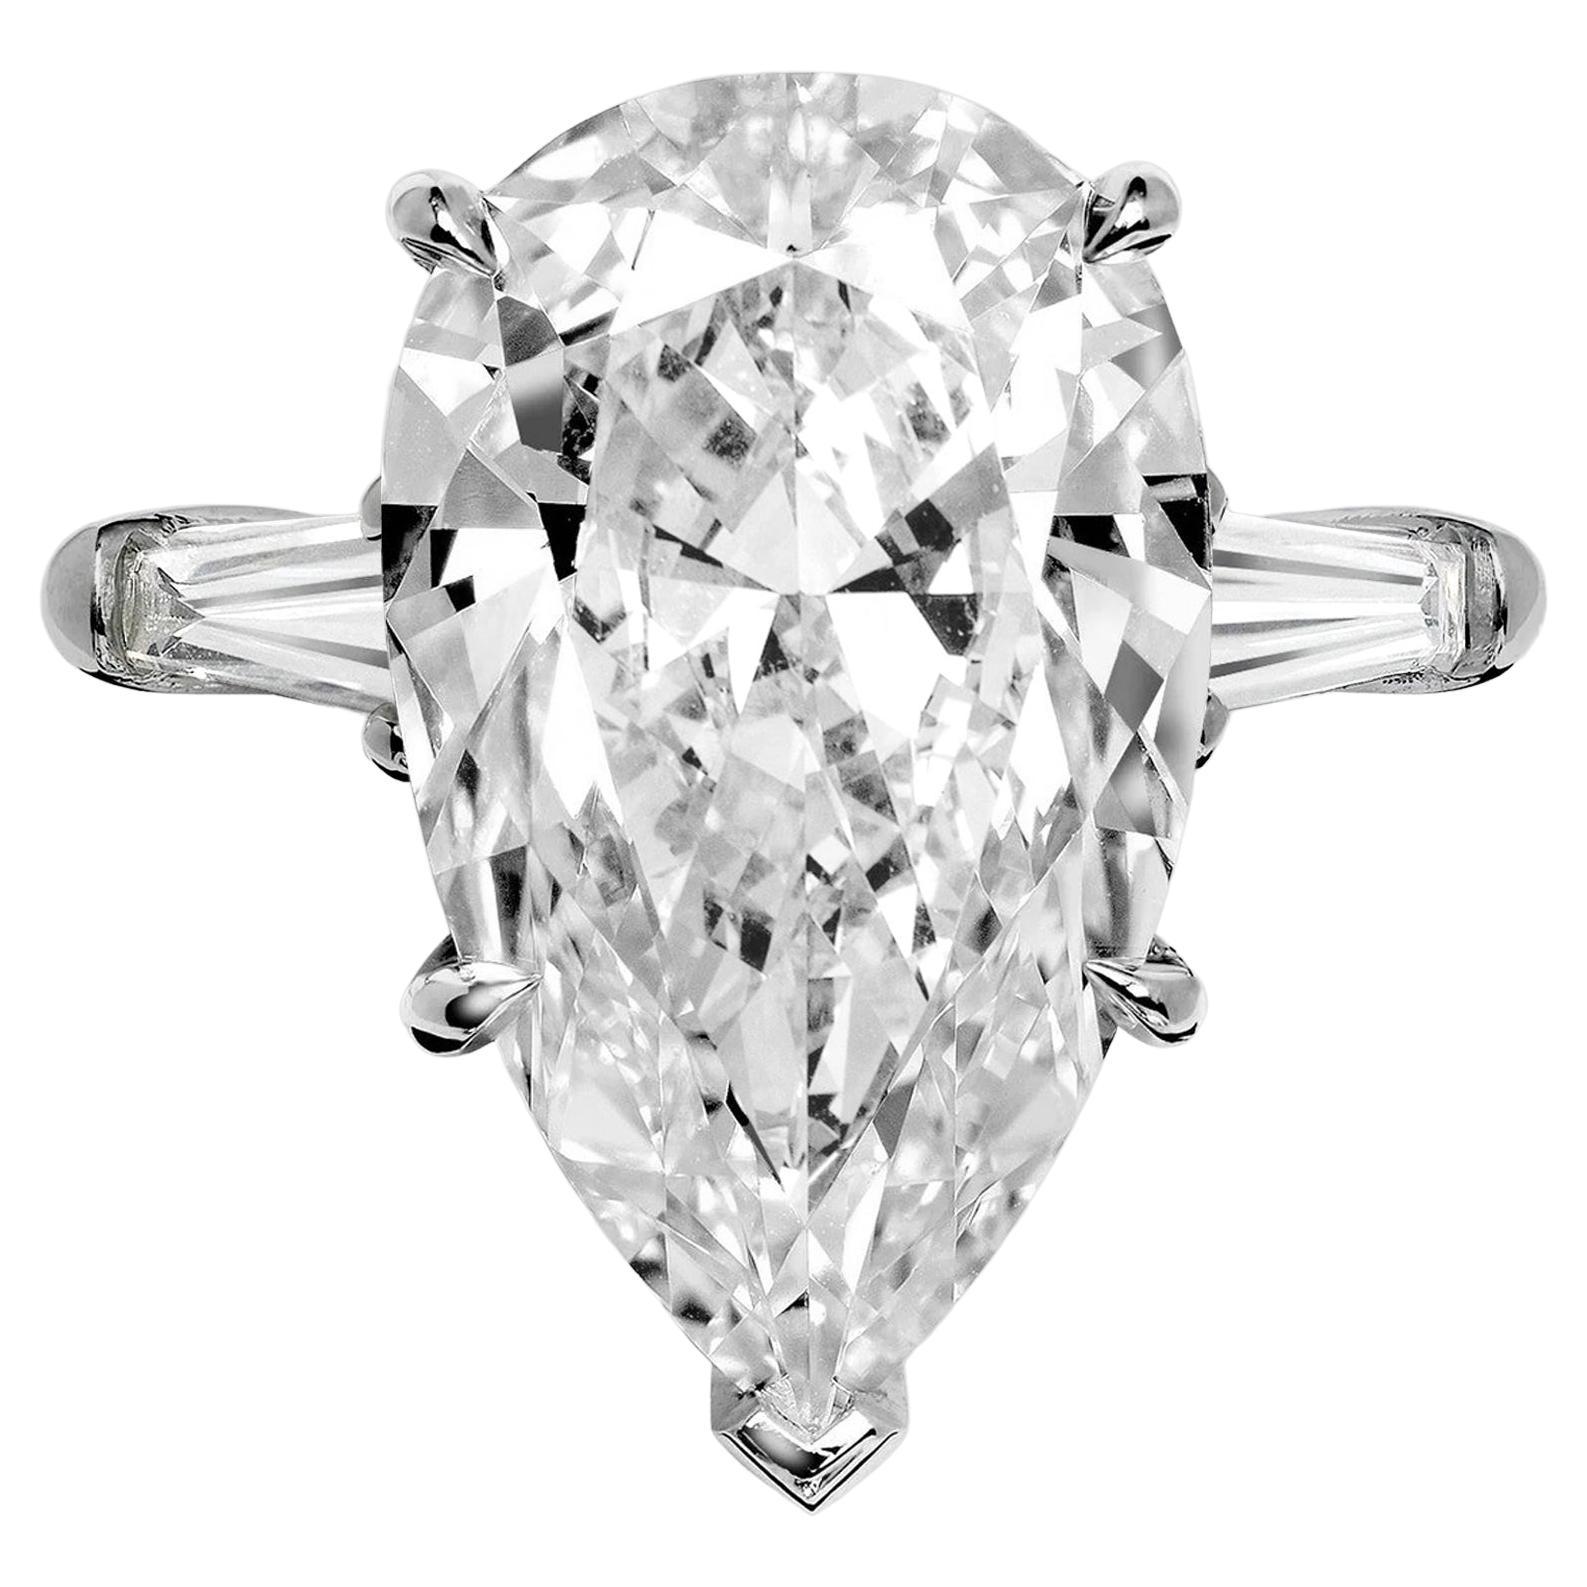 GIA Certified 5 Carat VVS2 Clarity Pear Cut Solitaire Diamond Ring